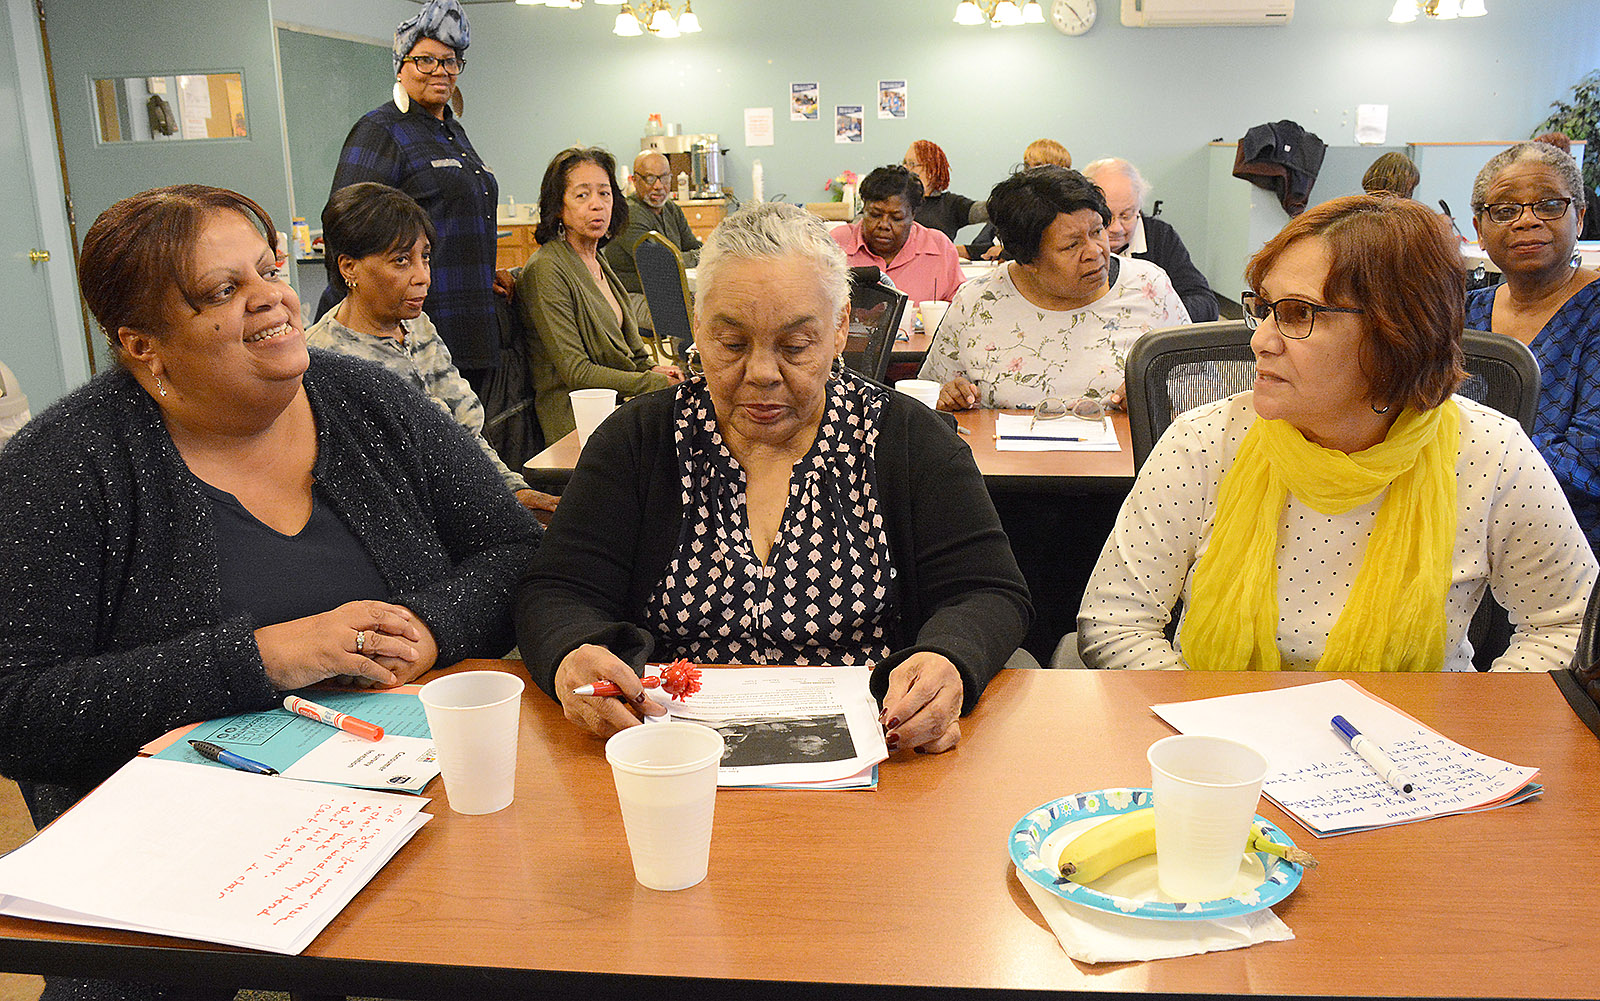  Ruth Quinones, Zoraida Montilla and Carman Rivera speak during the In-service for Foster Grandparent program at the Catholic Charities Garden Room at 128 Wilson Street, Buffalo. The three work in schools throughout Western New York.
Dan Cappellazzo/Special to The Sun